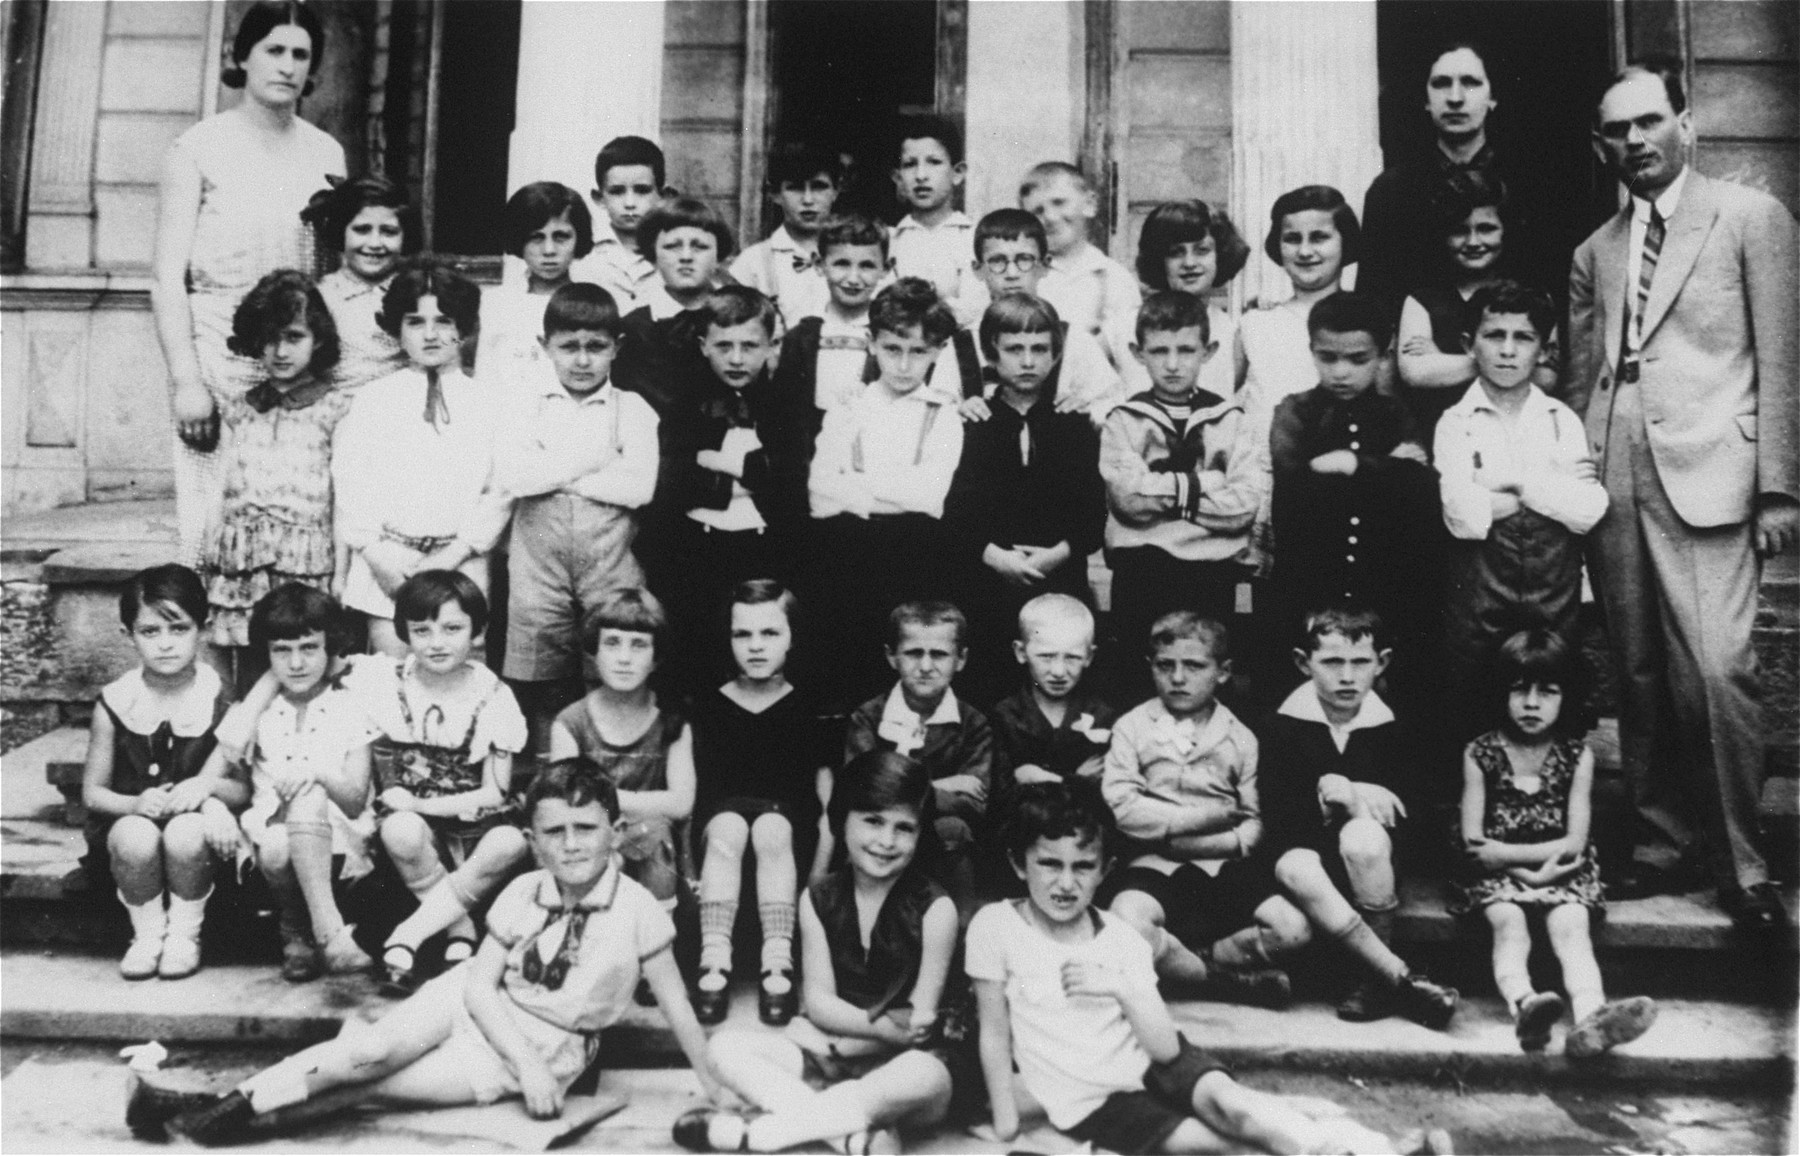 Class portrait of children at a Jewish primary school in Stanislawow.

Amalie Petranker is pictured in the third row from the front, fourth from the right.